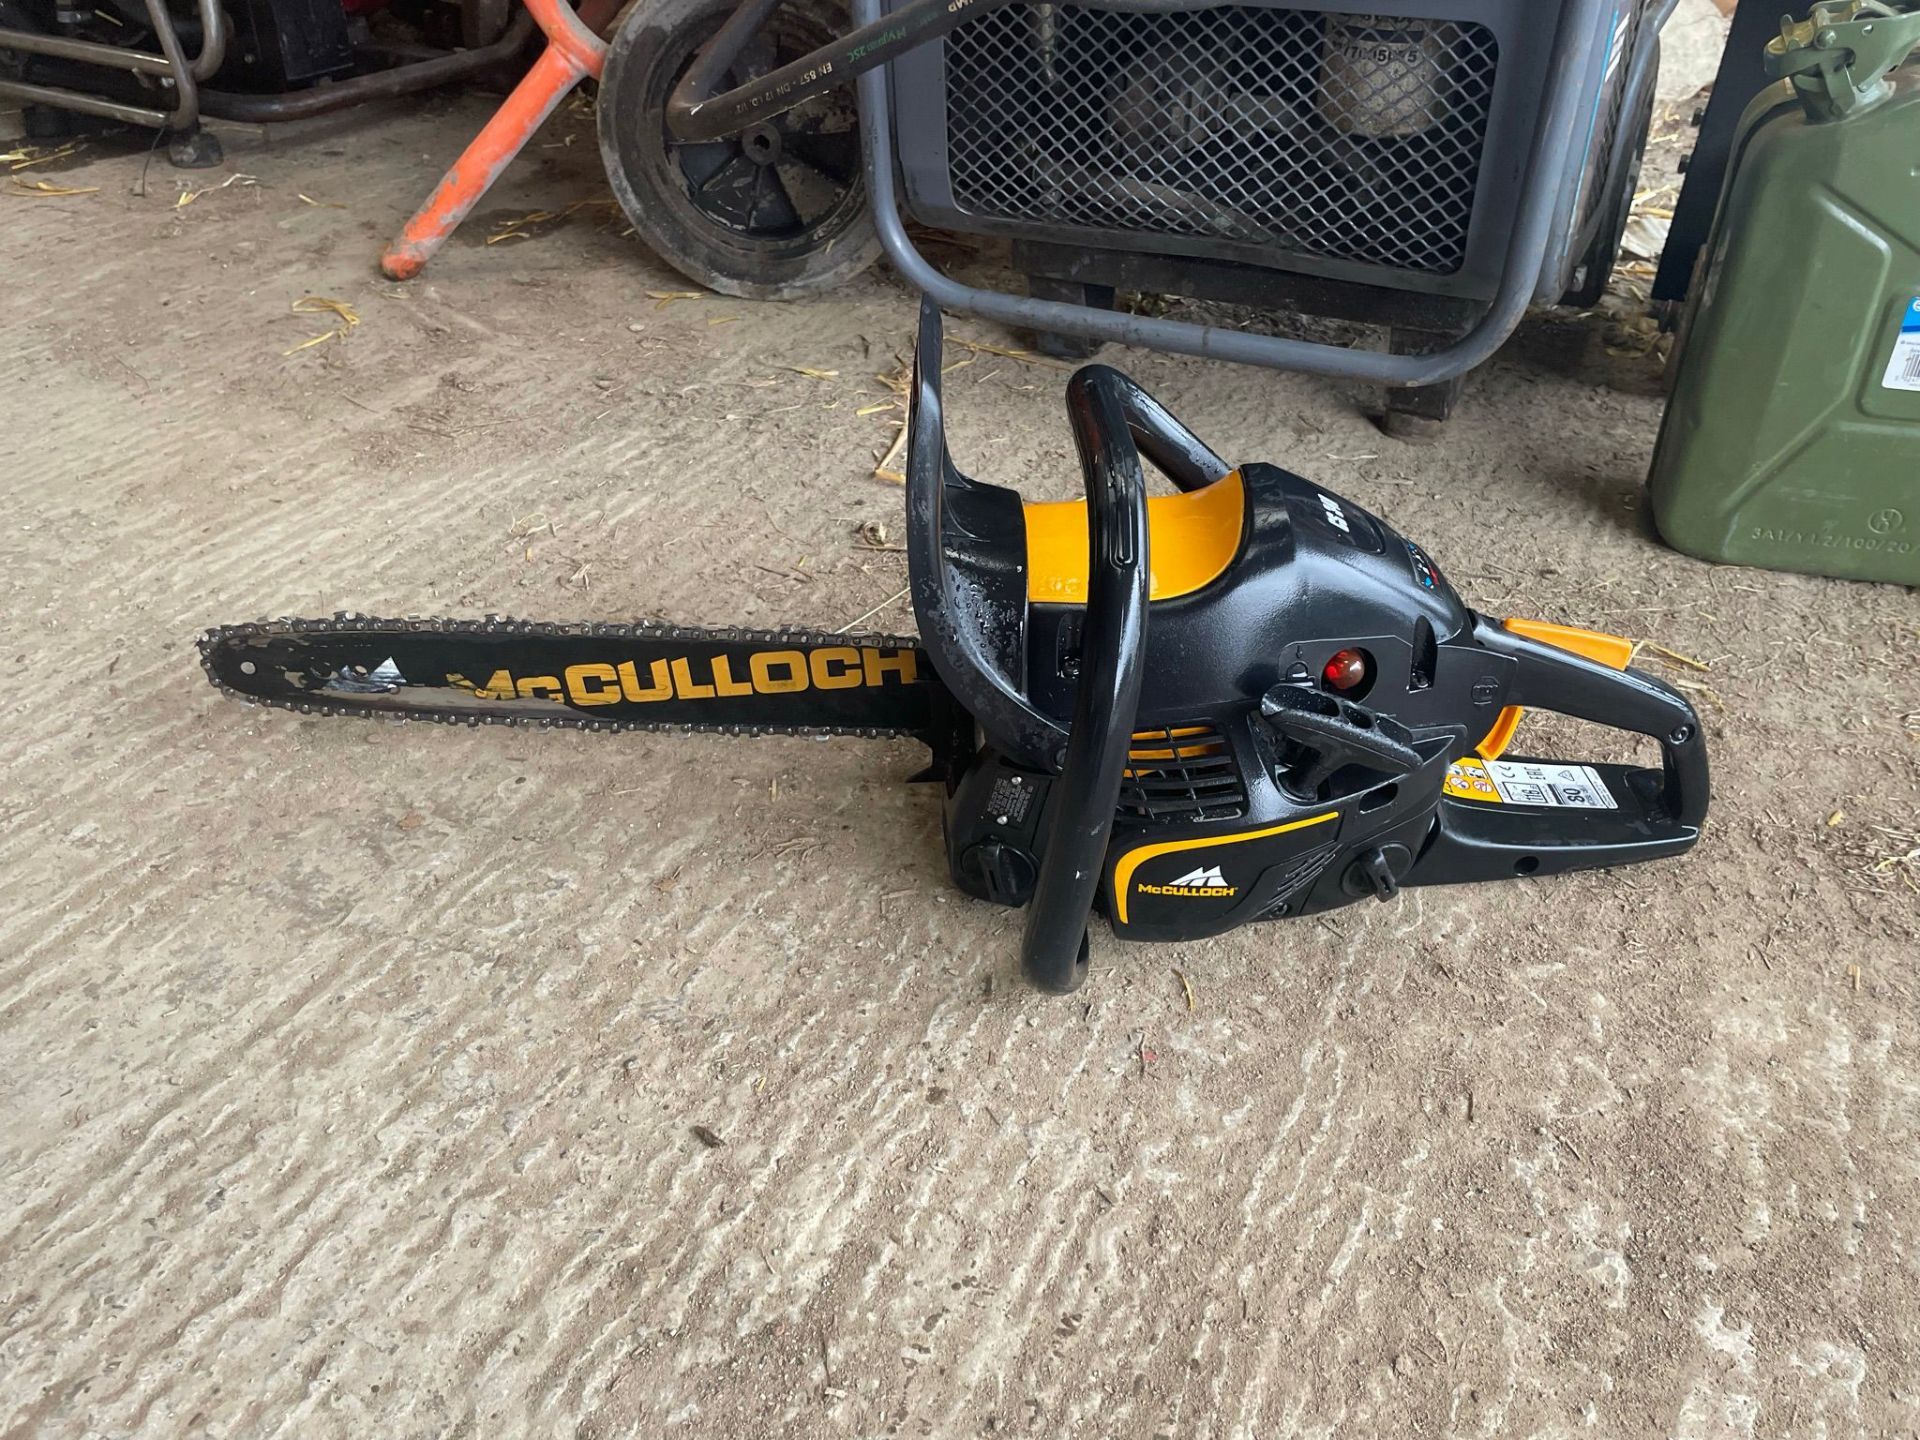 2018 McCulloch CS340 Petrol Handheld Chainsaw *NO VAT* - Image 3 of 4